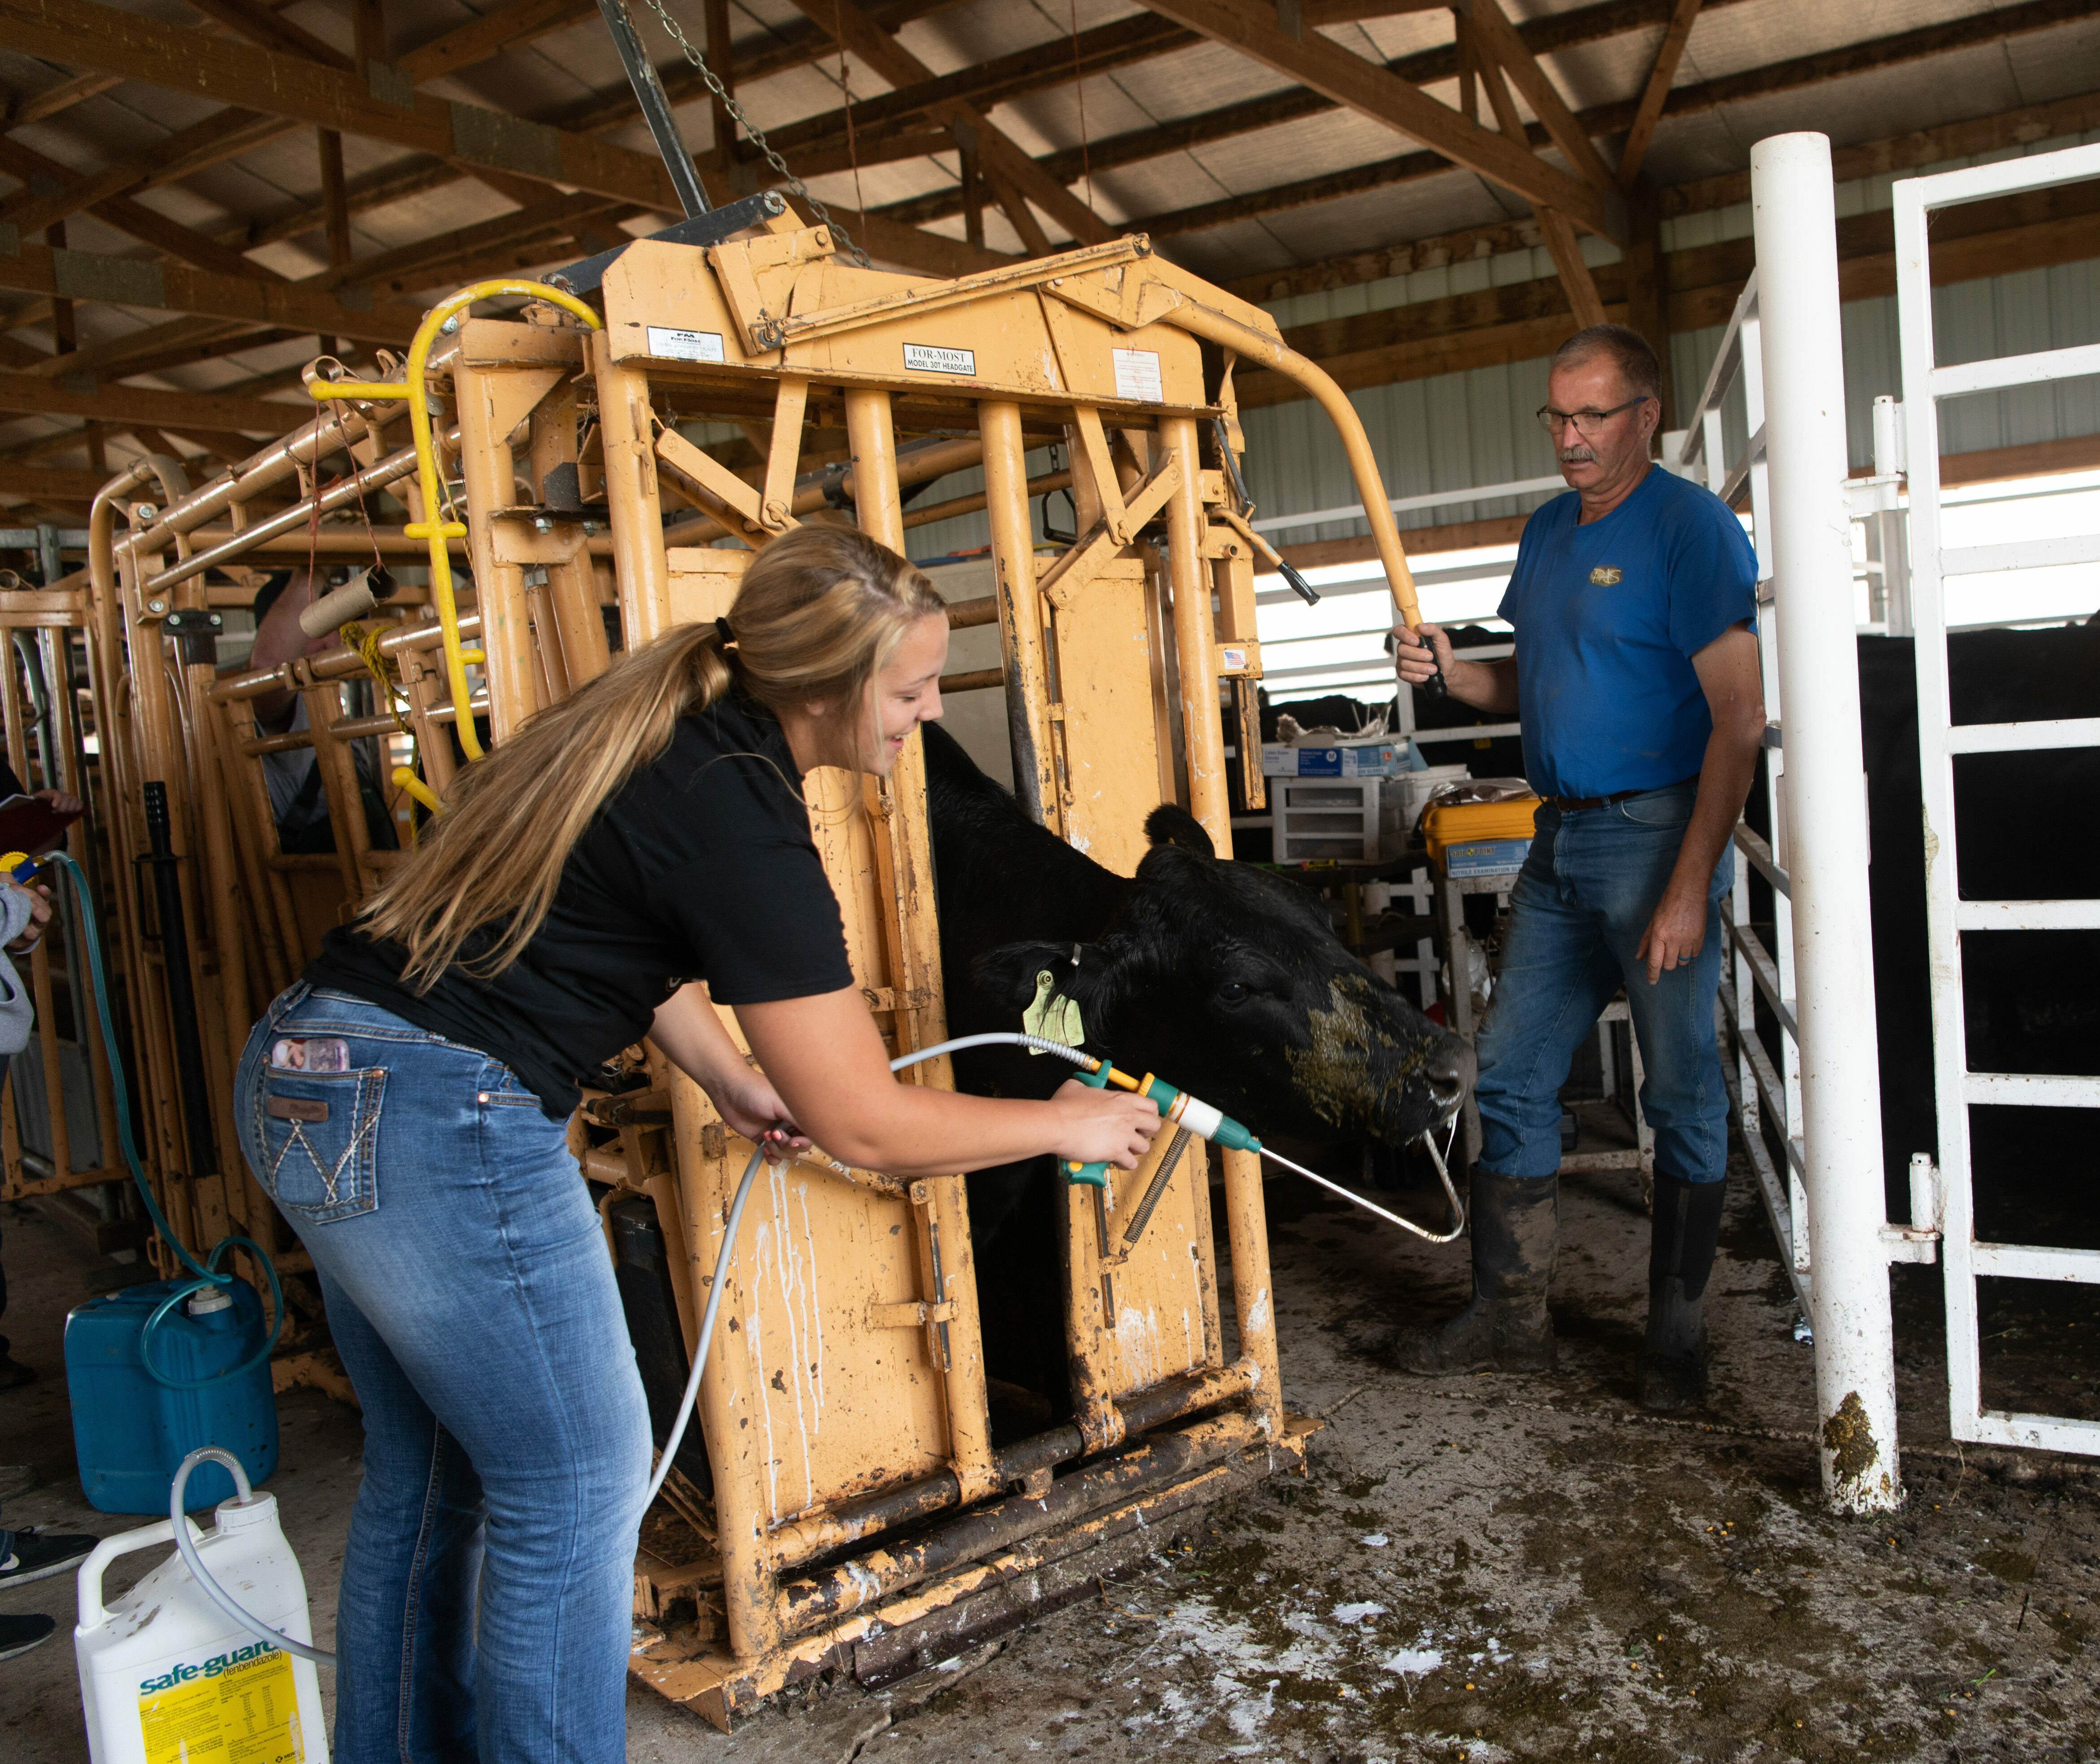 A female student works cattle at the Agriculture Stewardship Center